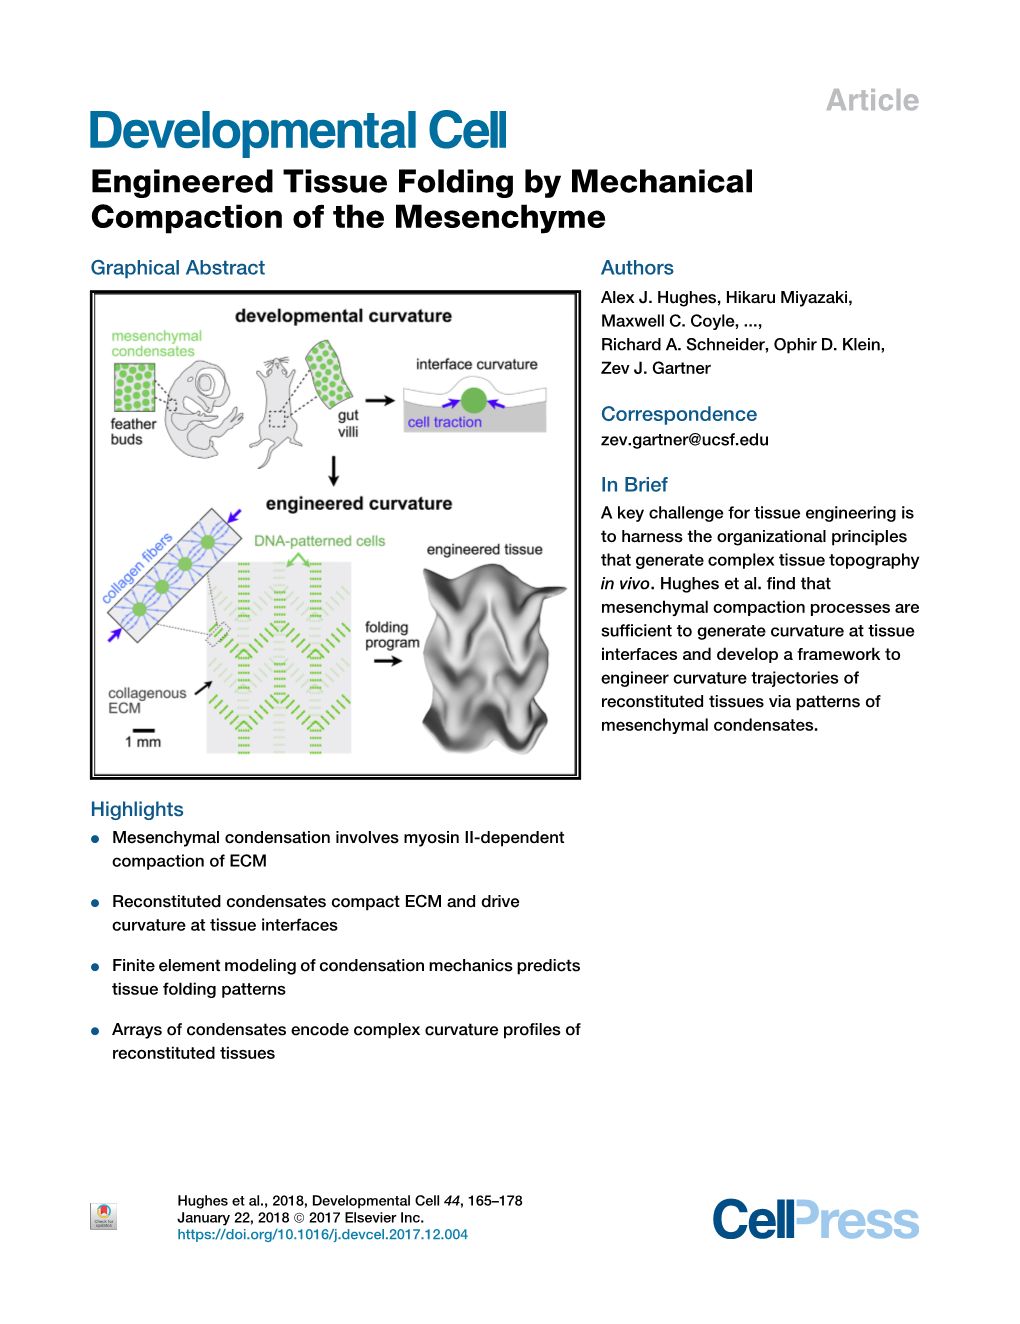 Engineered Tissue Folding by Mechanical Compaction of the Mesenchyme